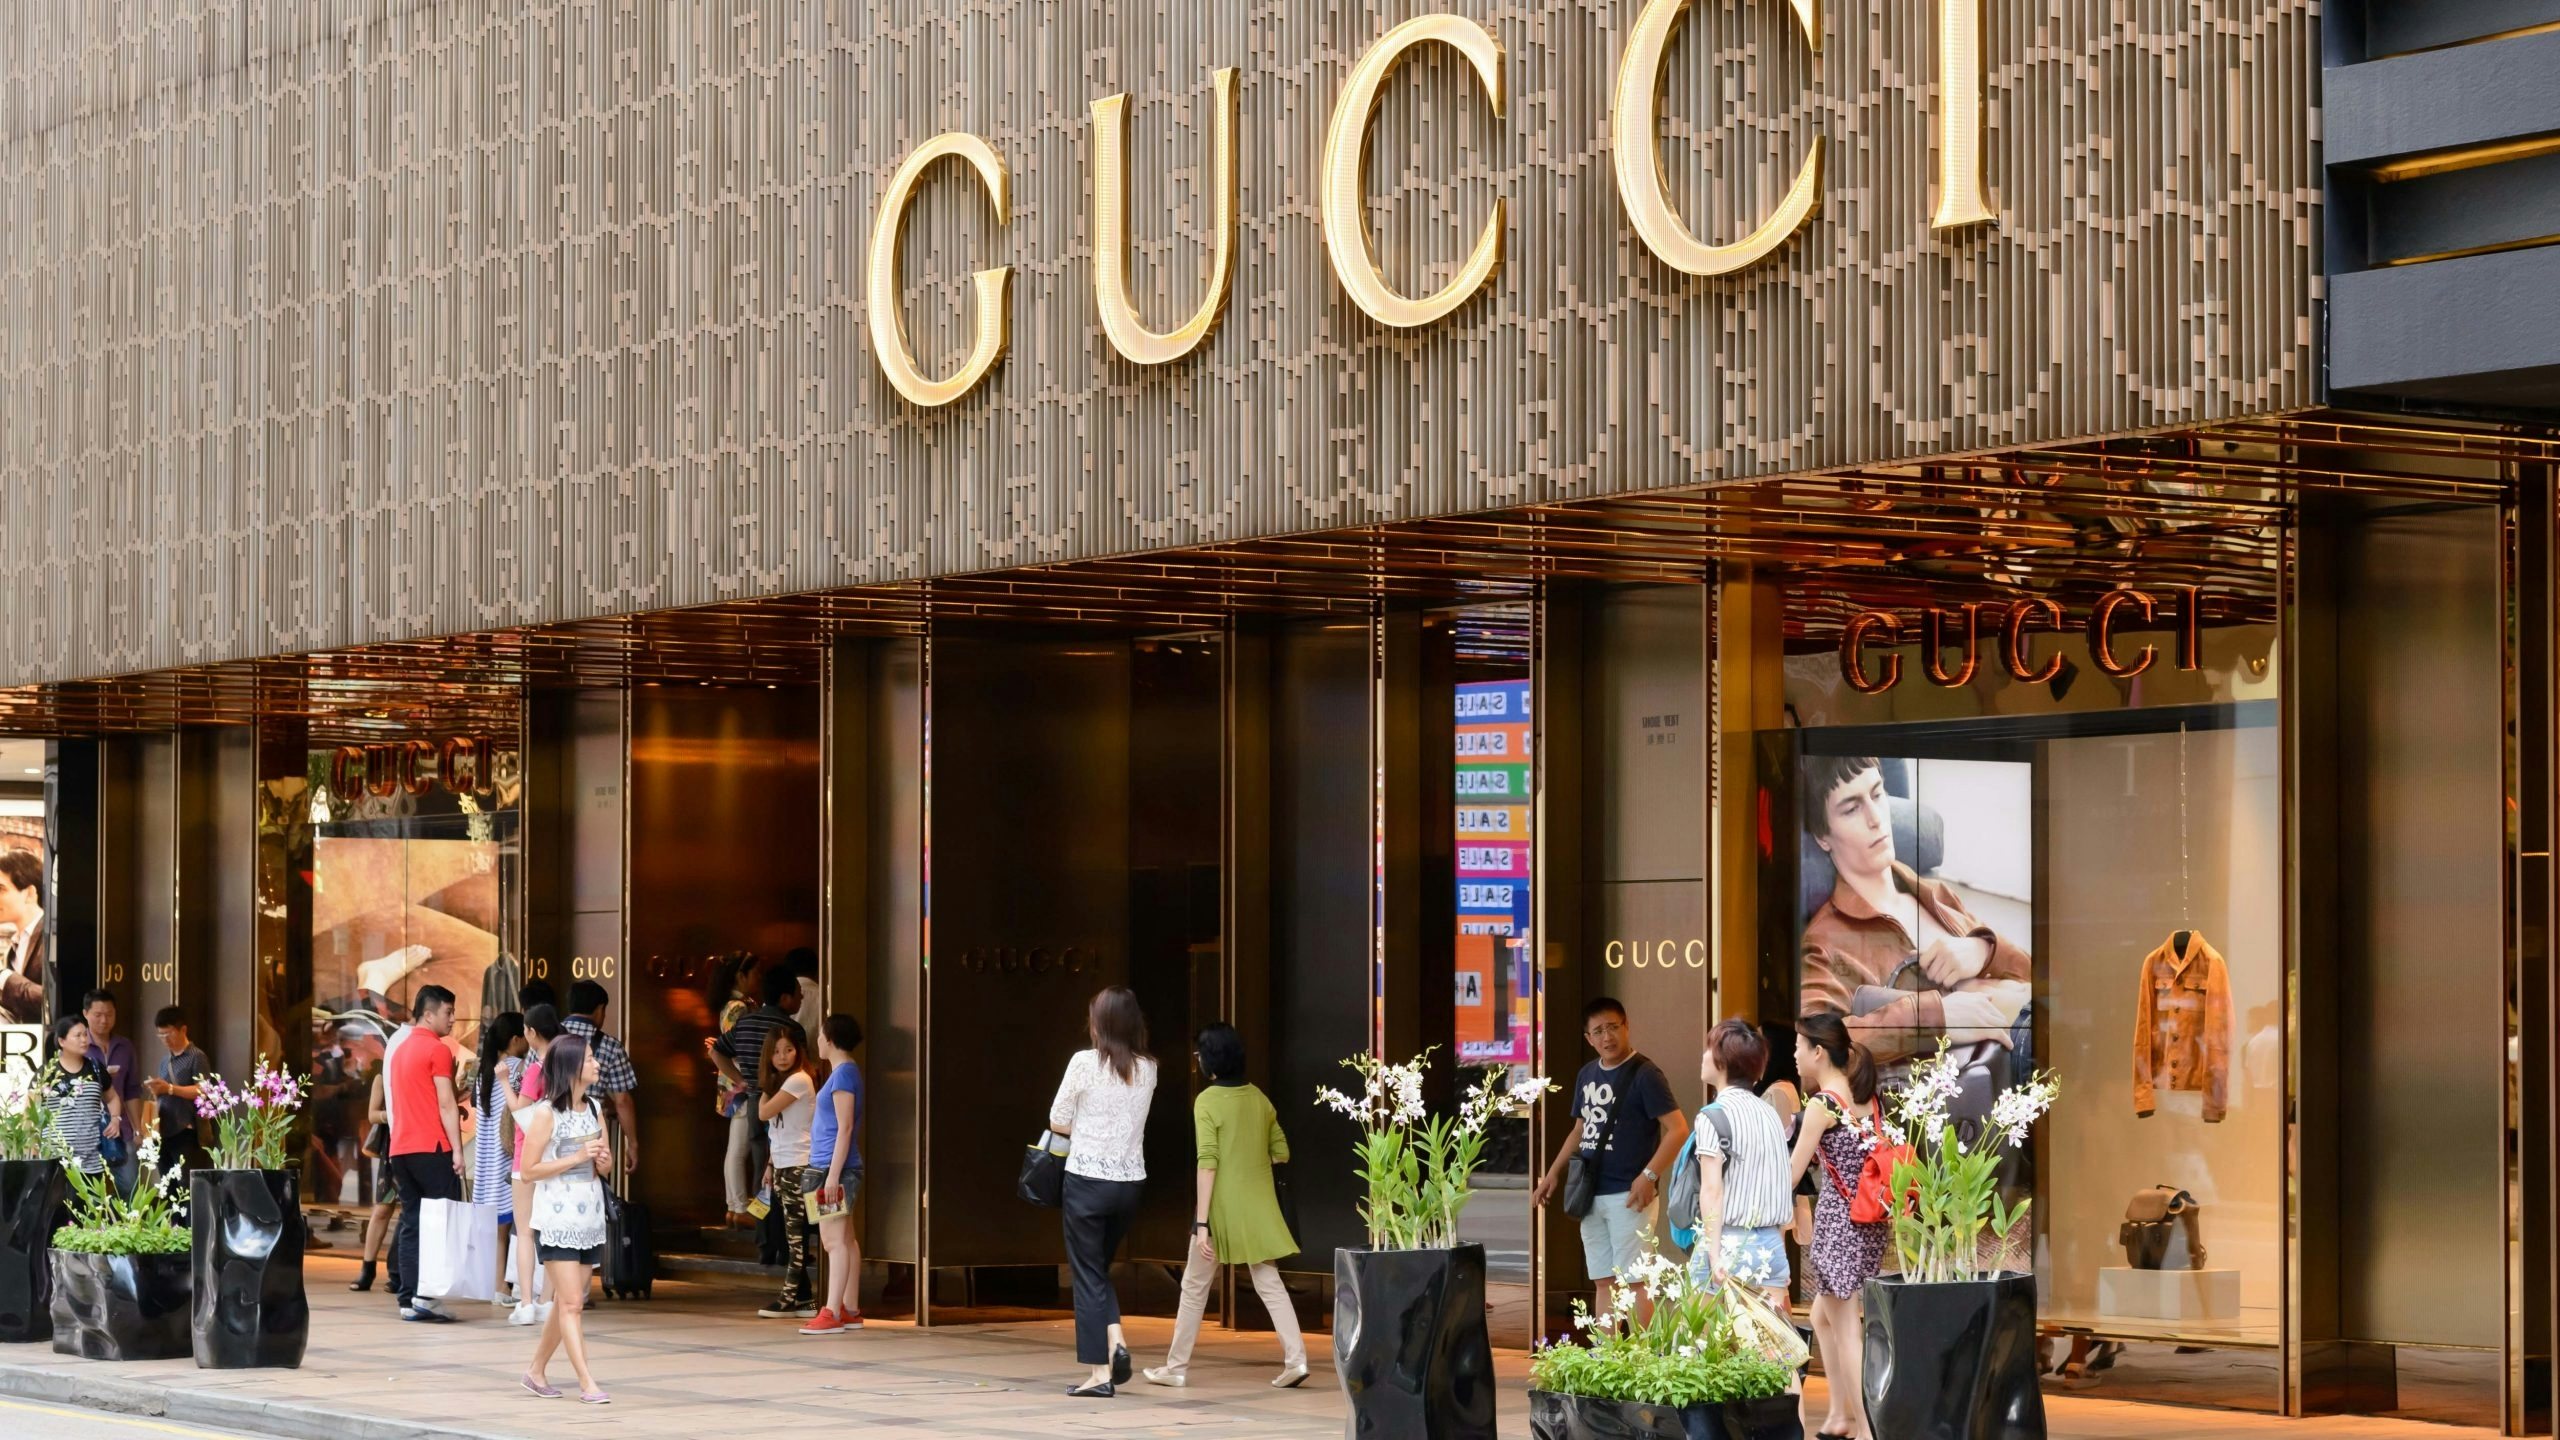 China’s Very Important Clients, who mostly comprise high-net-worth individuals (HNWI), were a major contributor to luxury sales over the year. Photo: Shutterstock